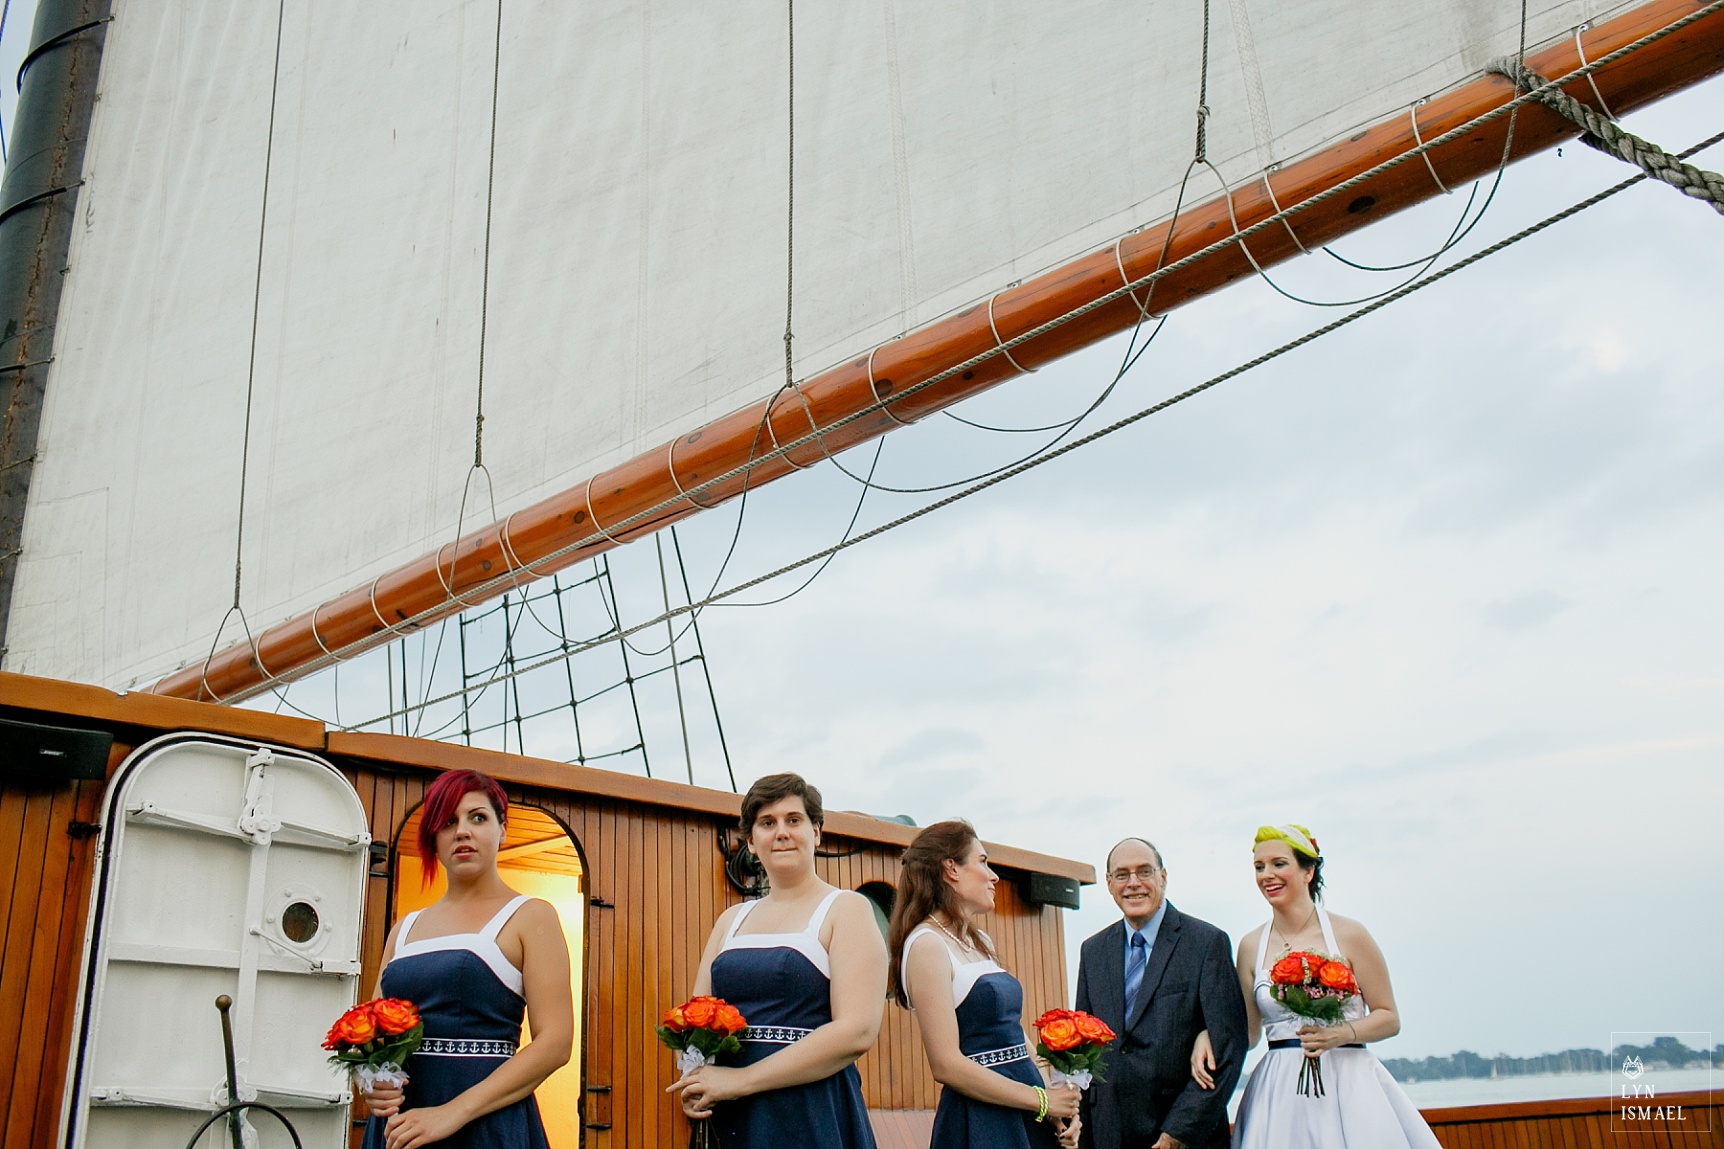 The bride, her father, and her bridesmaids prepare to walk down the aisle on board the tall ship Empire Sandy